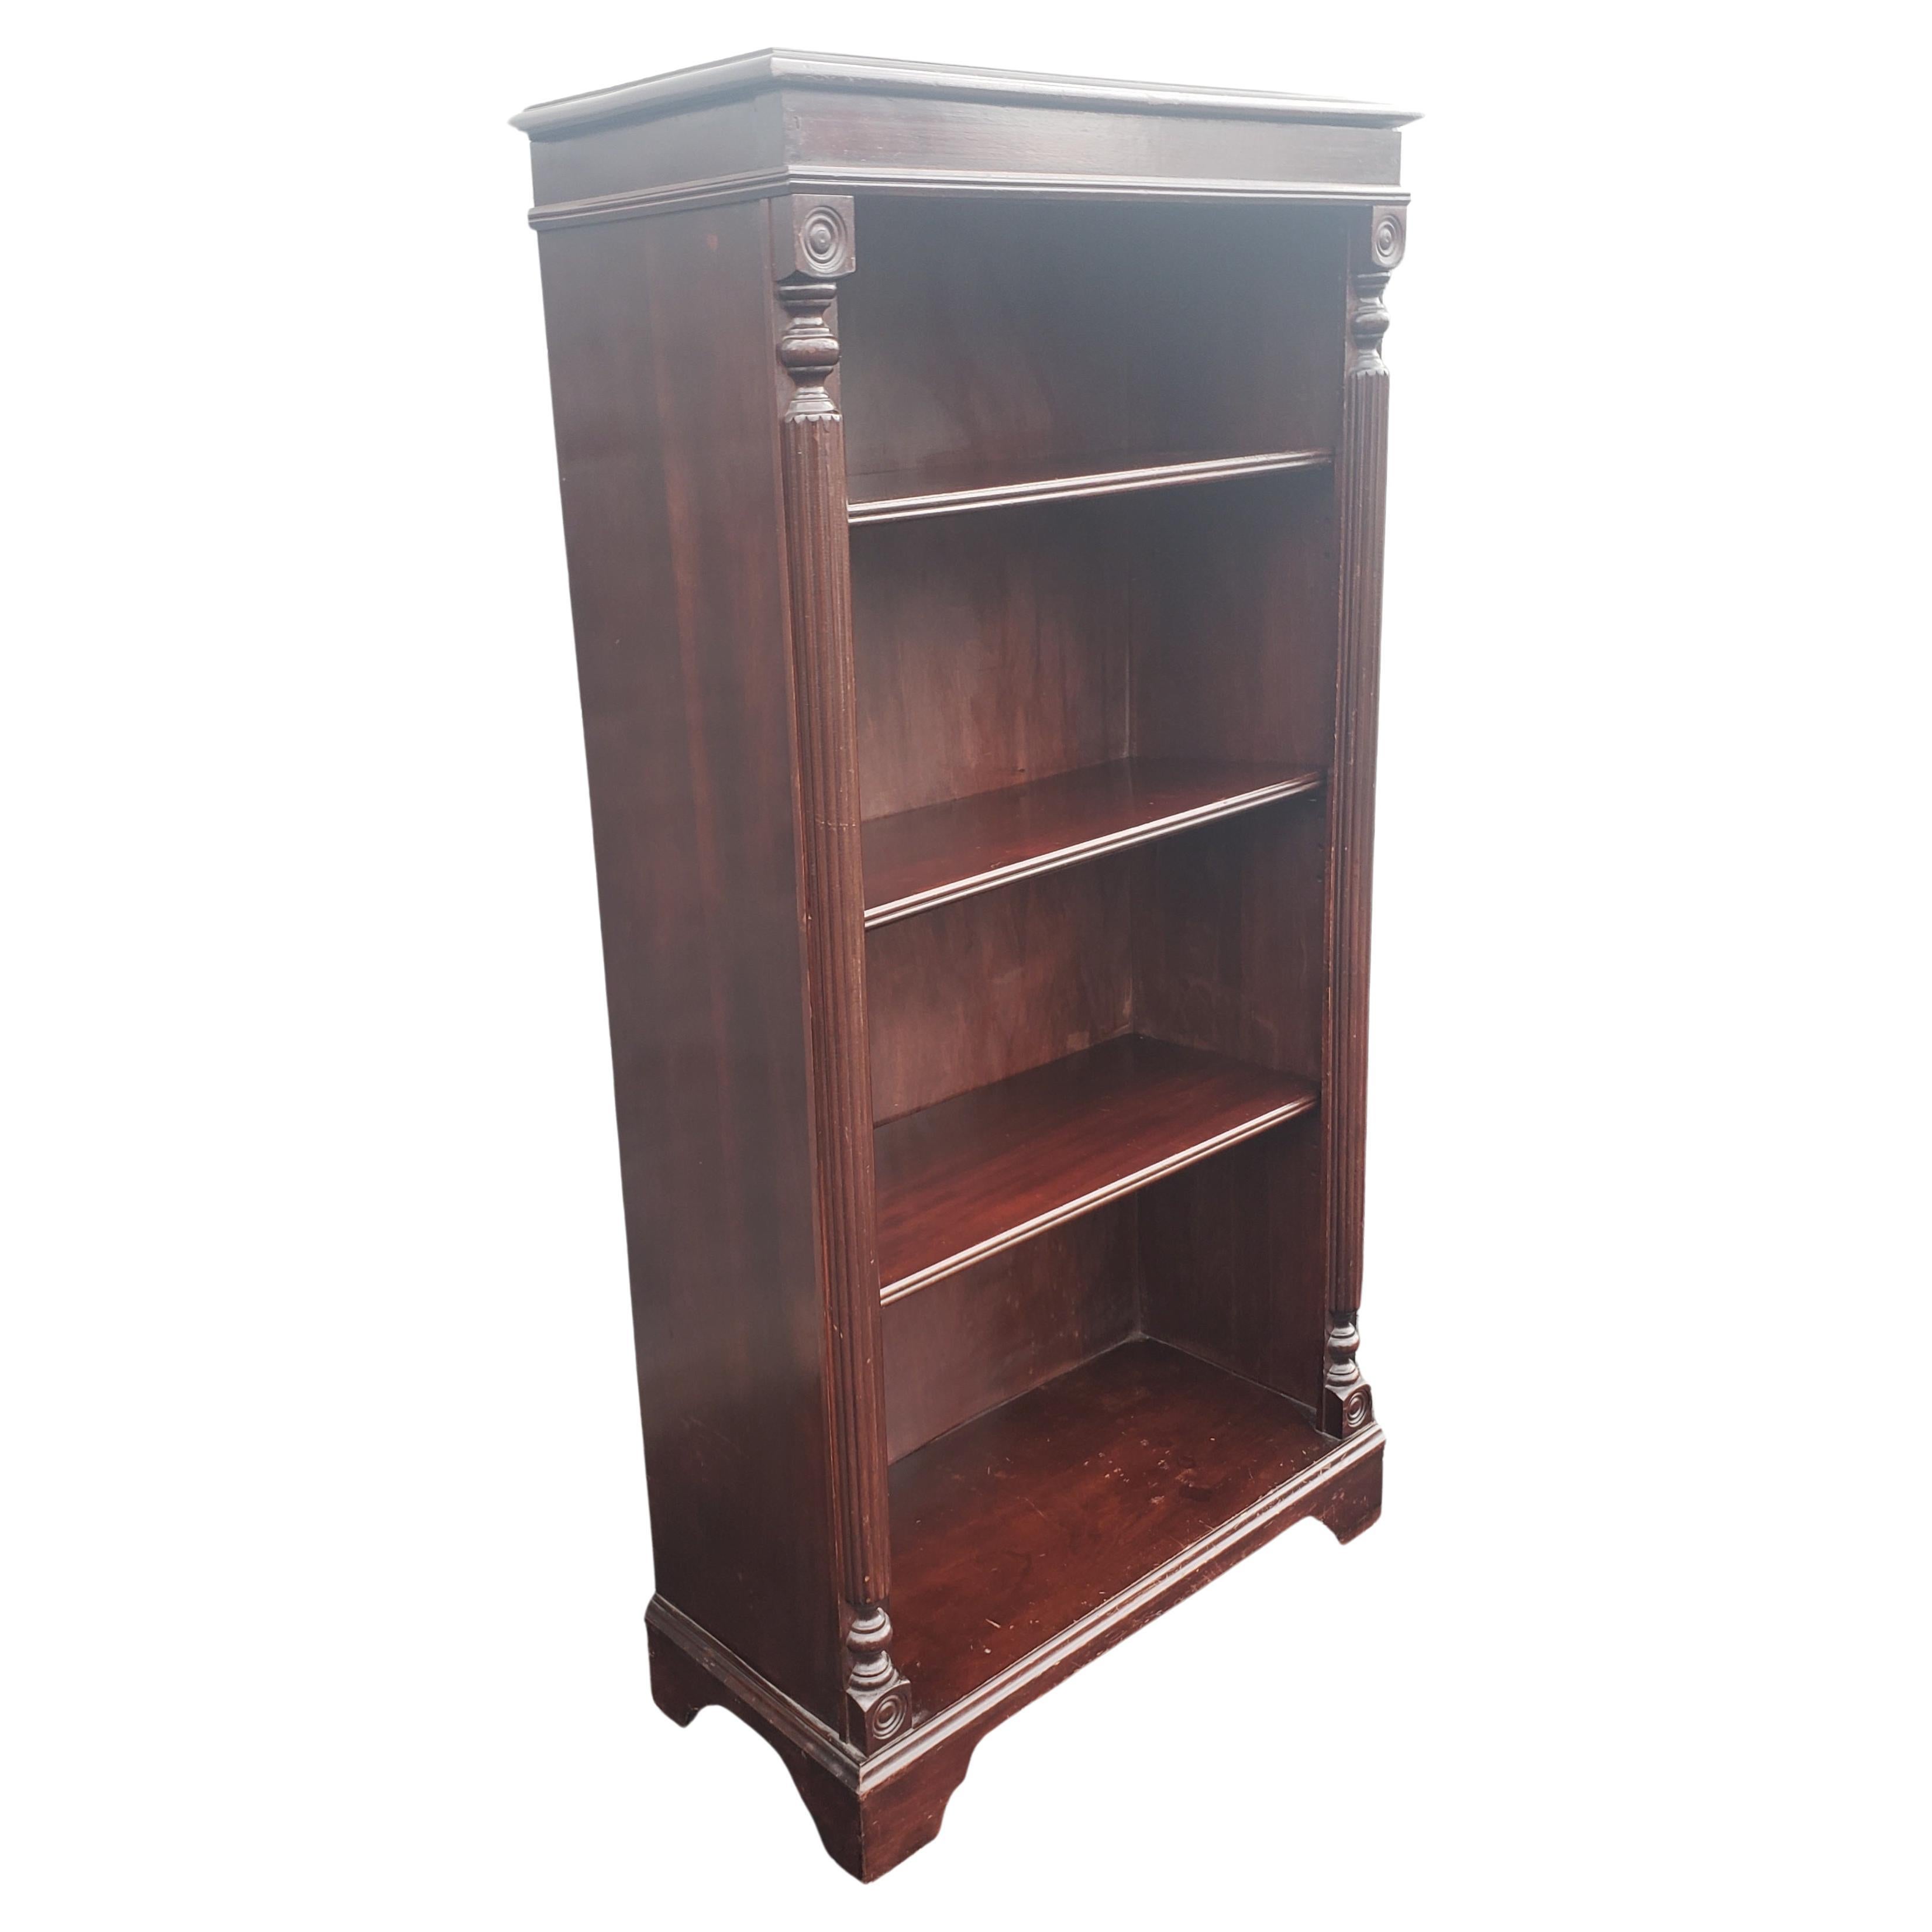 Early 20th century Frankson furniture Chippendale Solid mahogany narrow bookcase, bookshelf
 Measures 24